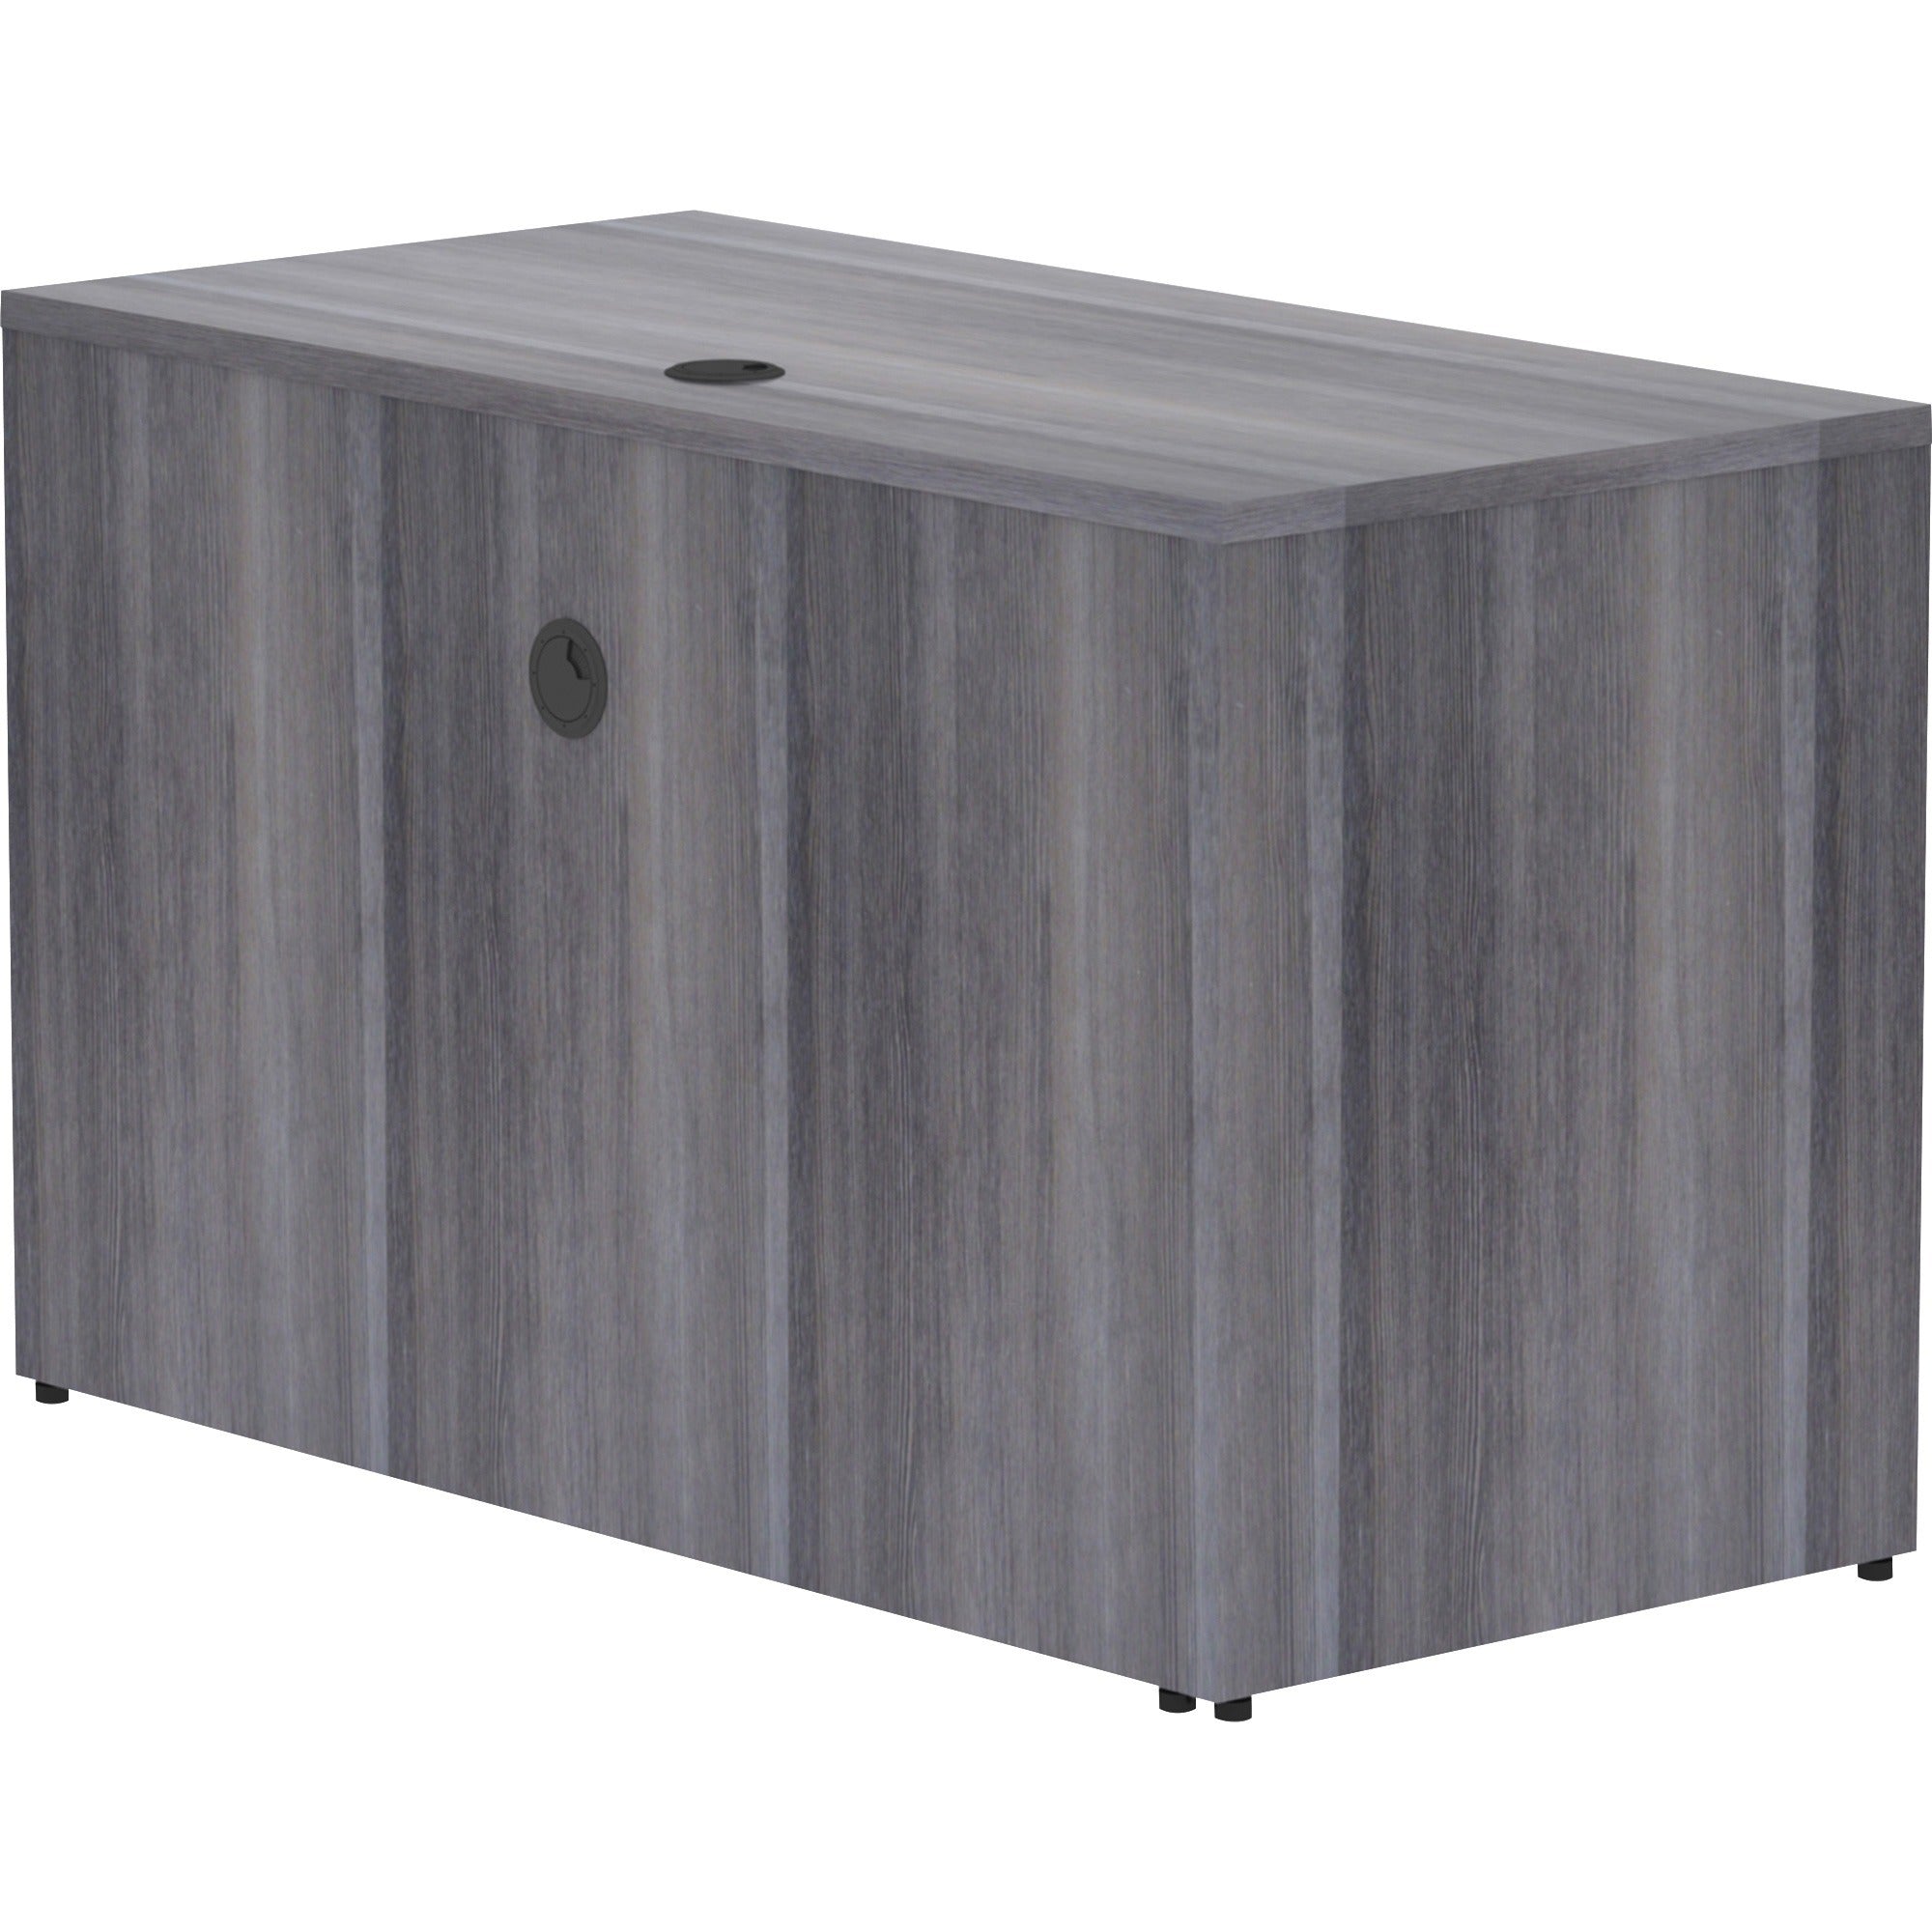 lorell-essentials-series-return-shell-48-x-24295--1-top-laminate-weathered-charcoal-table-top-modesty-panel_llr69554 - 6